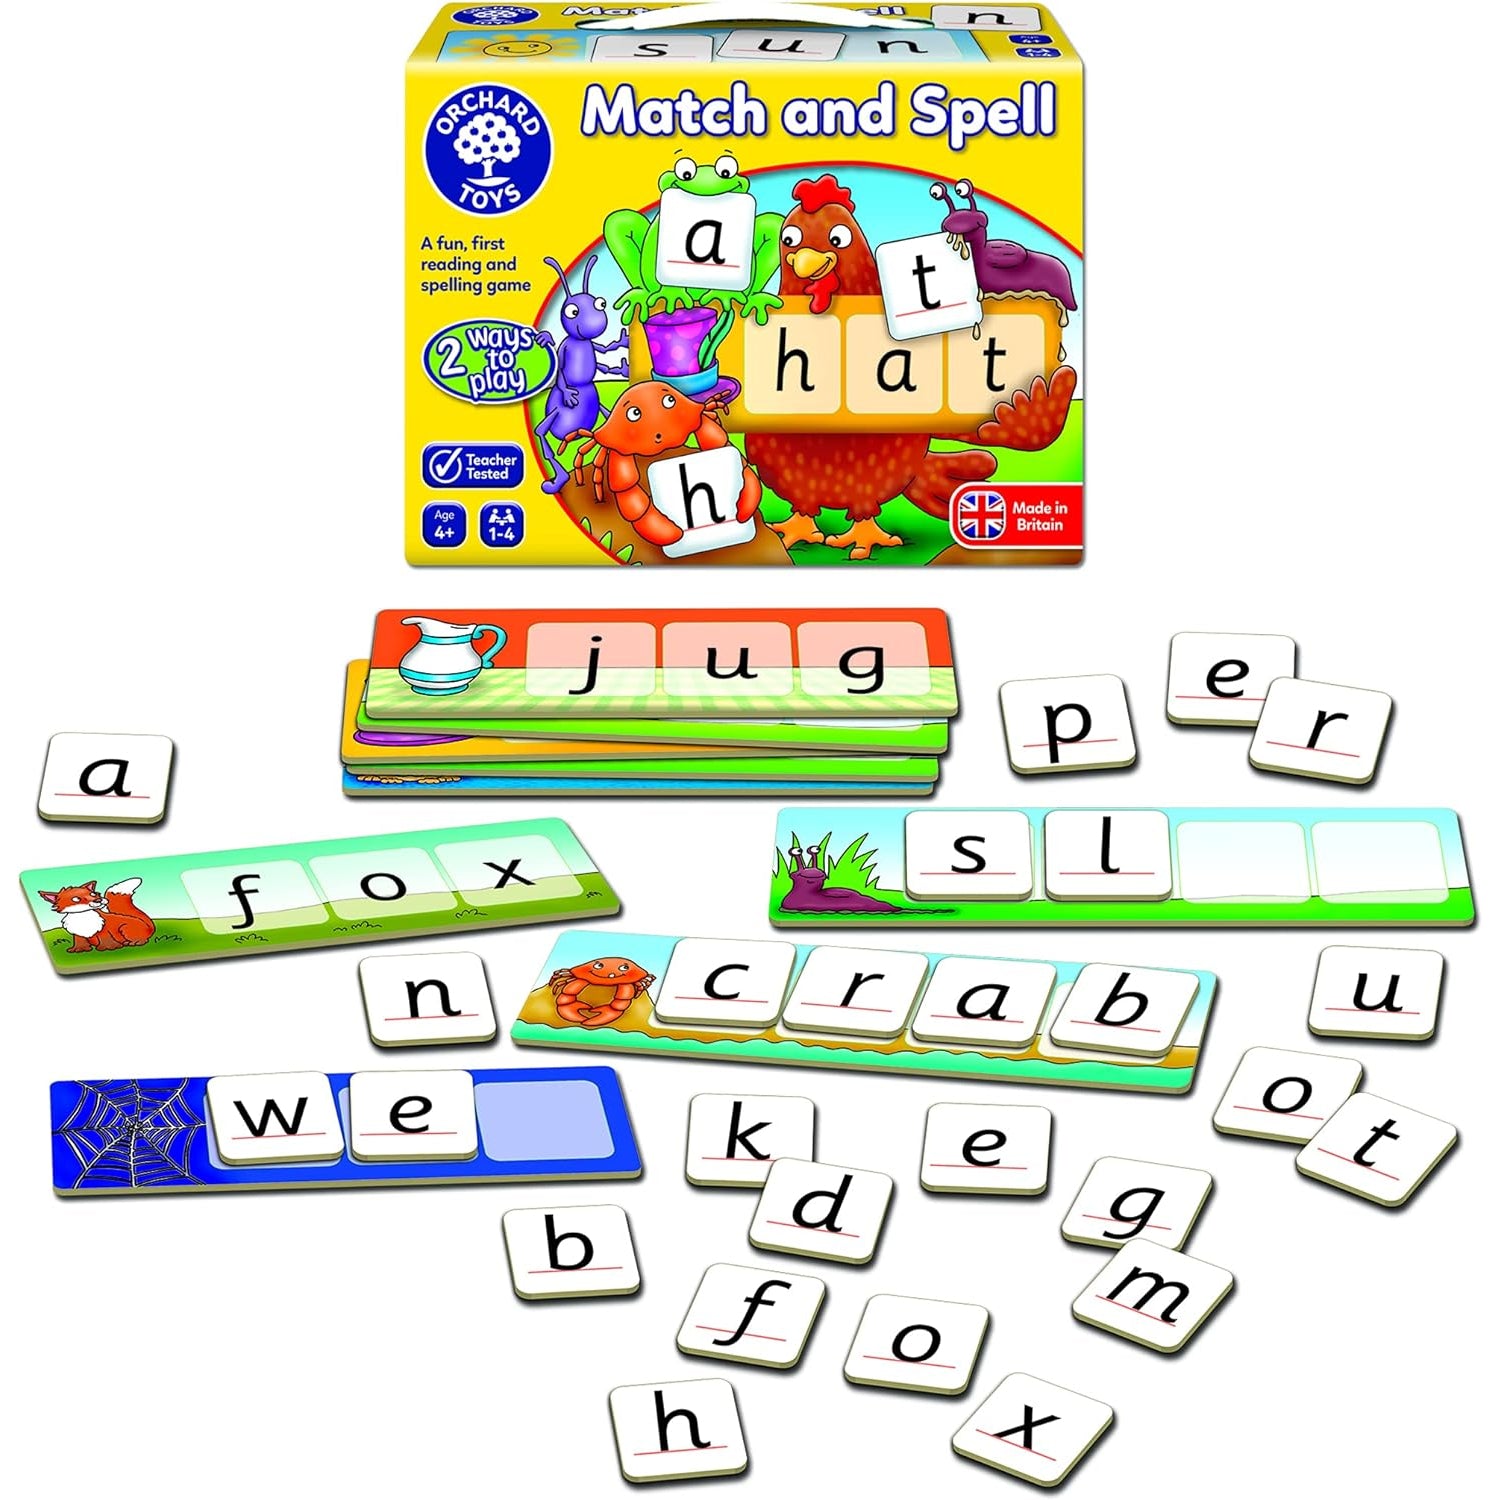 Orchard Toys Match & Spell - Fun Educational Game